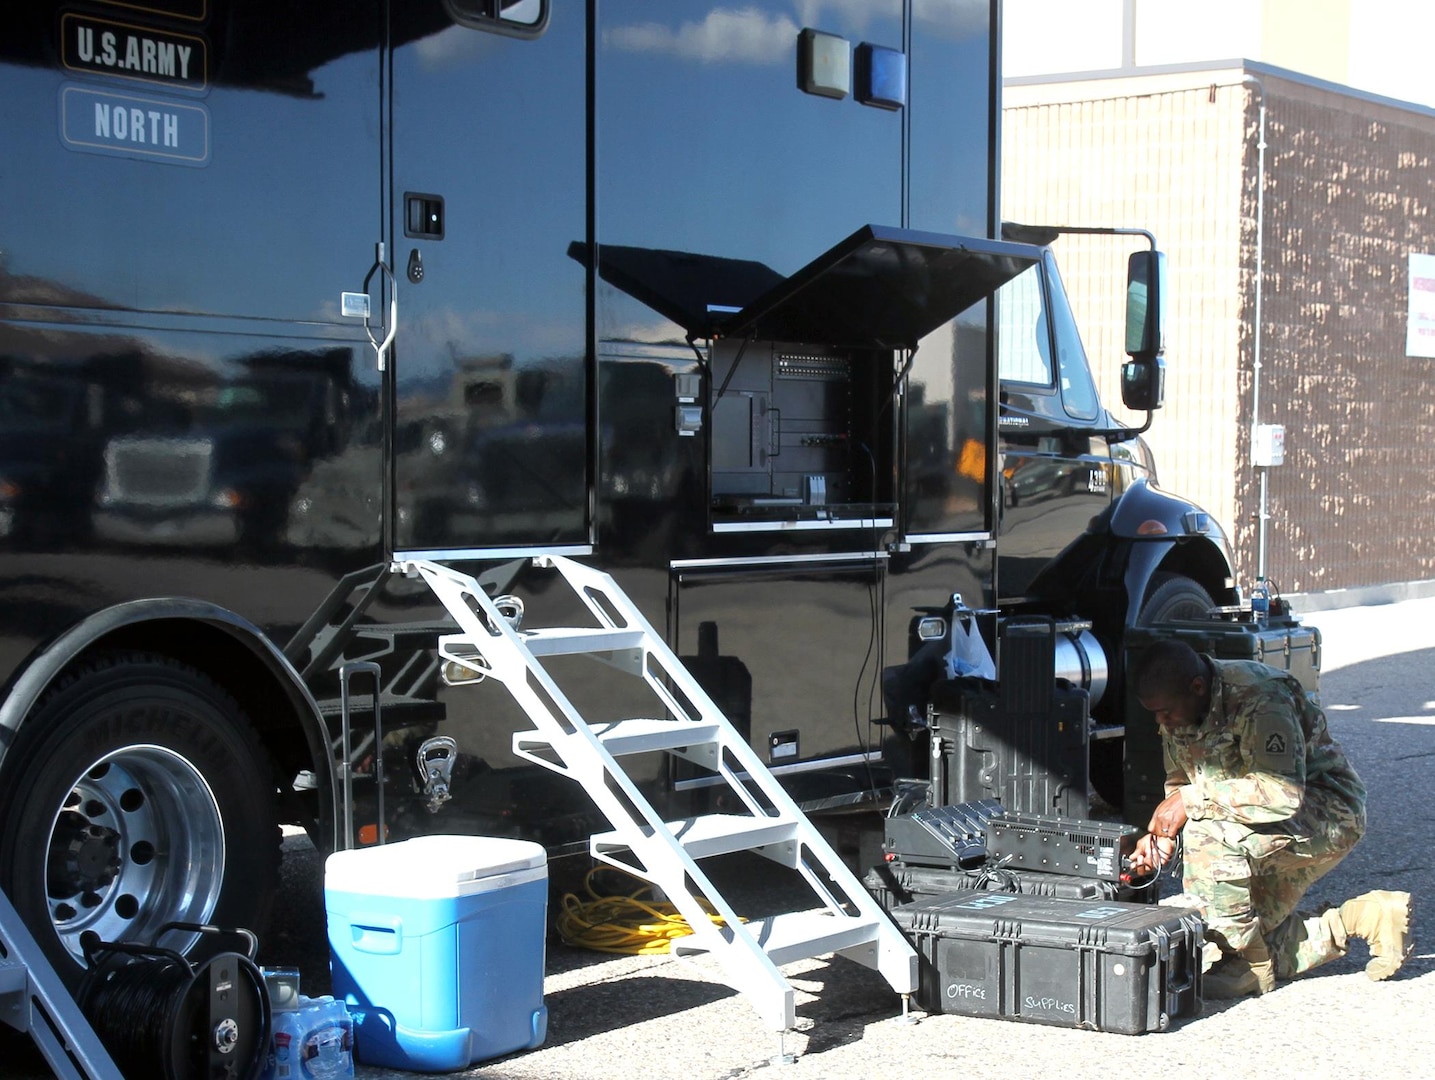 Sgt. 1st Class Jason Roseburgh, a signal support systems specialist with Task Force 51, U.S. Army North, performs mission checks on signal equipment outside the Sentinel vehicle at Kirkland Air Base in Albuquerque, N.M., during exercise Vigilant Guard 17-04 Aug. 3-11.